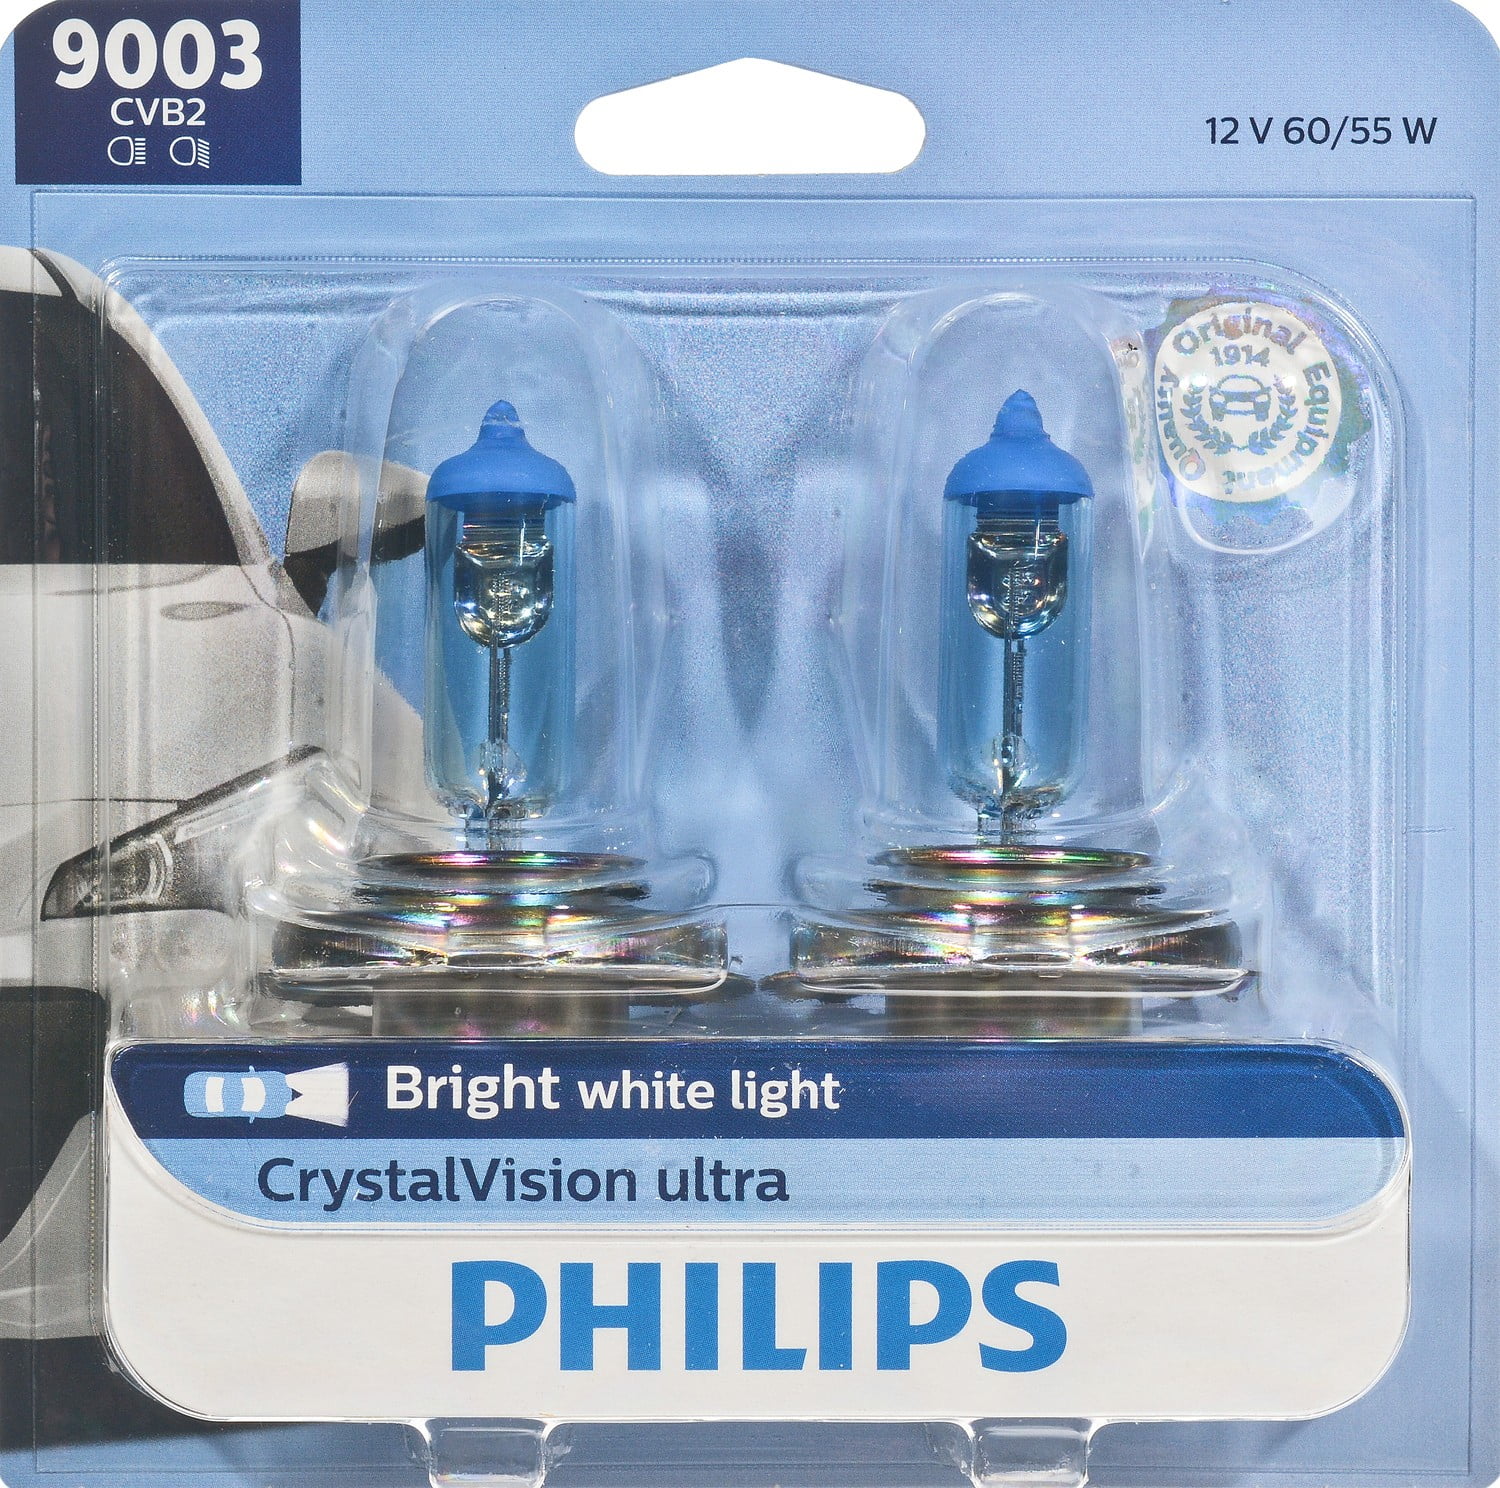 Philips 9003 Crystalvision Ultra Headlight, Pack of 2